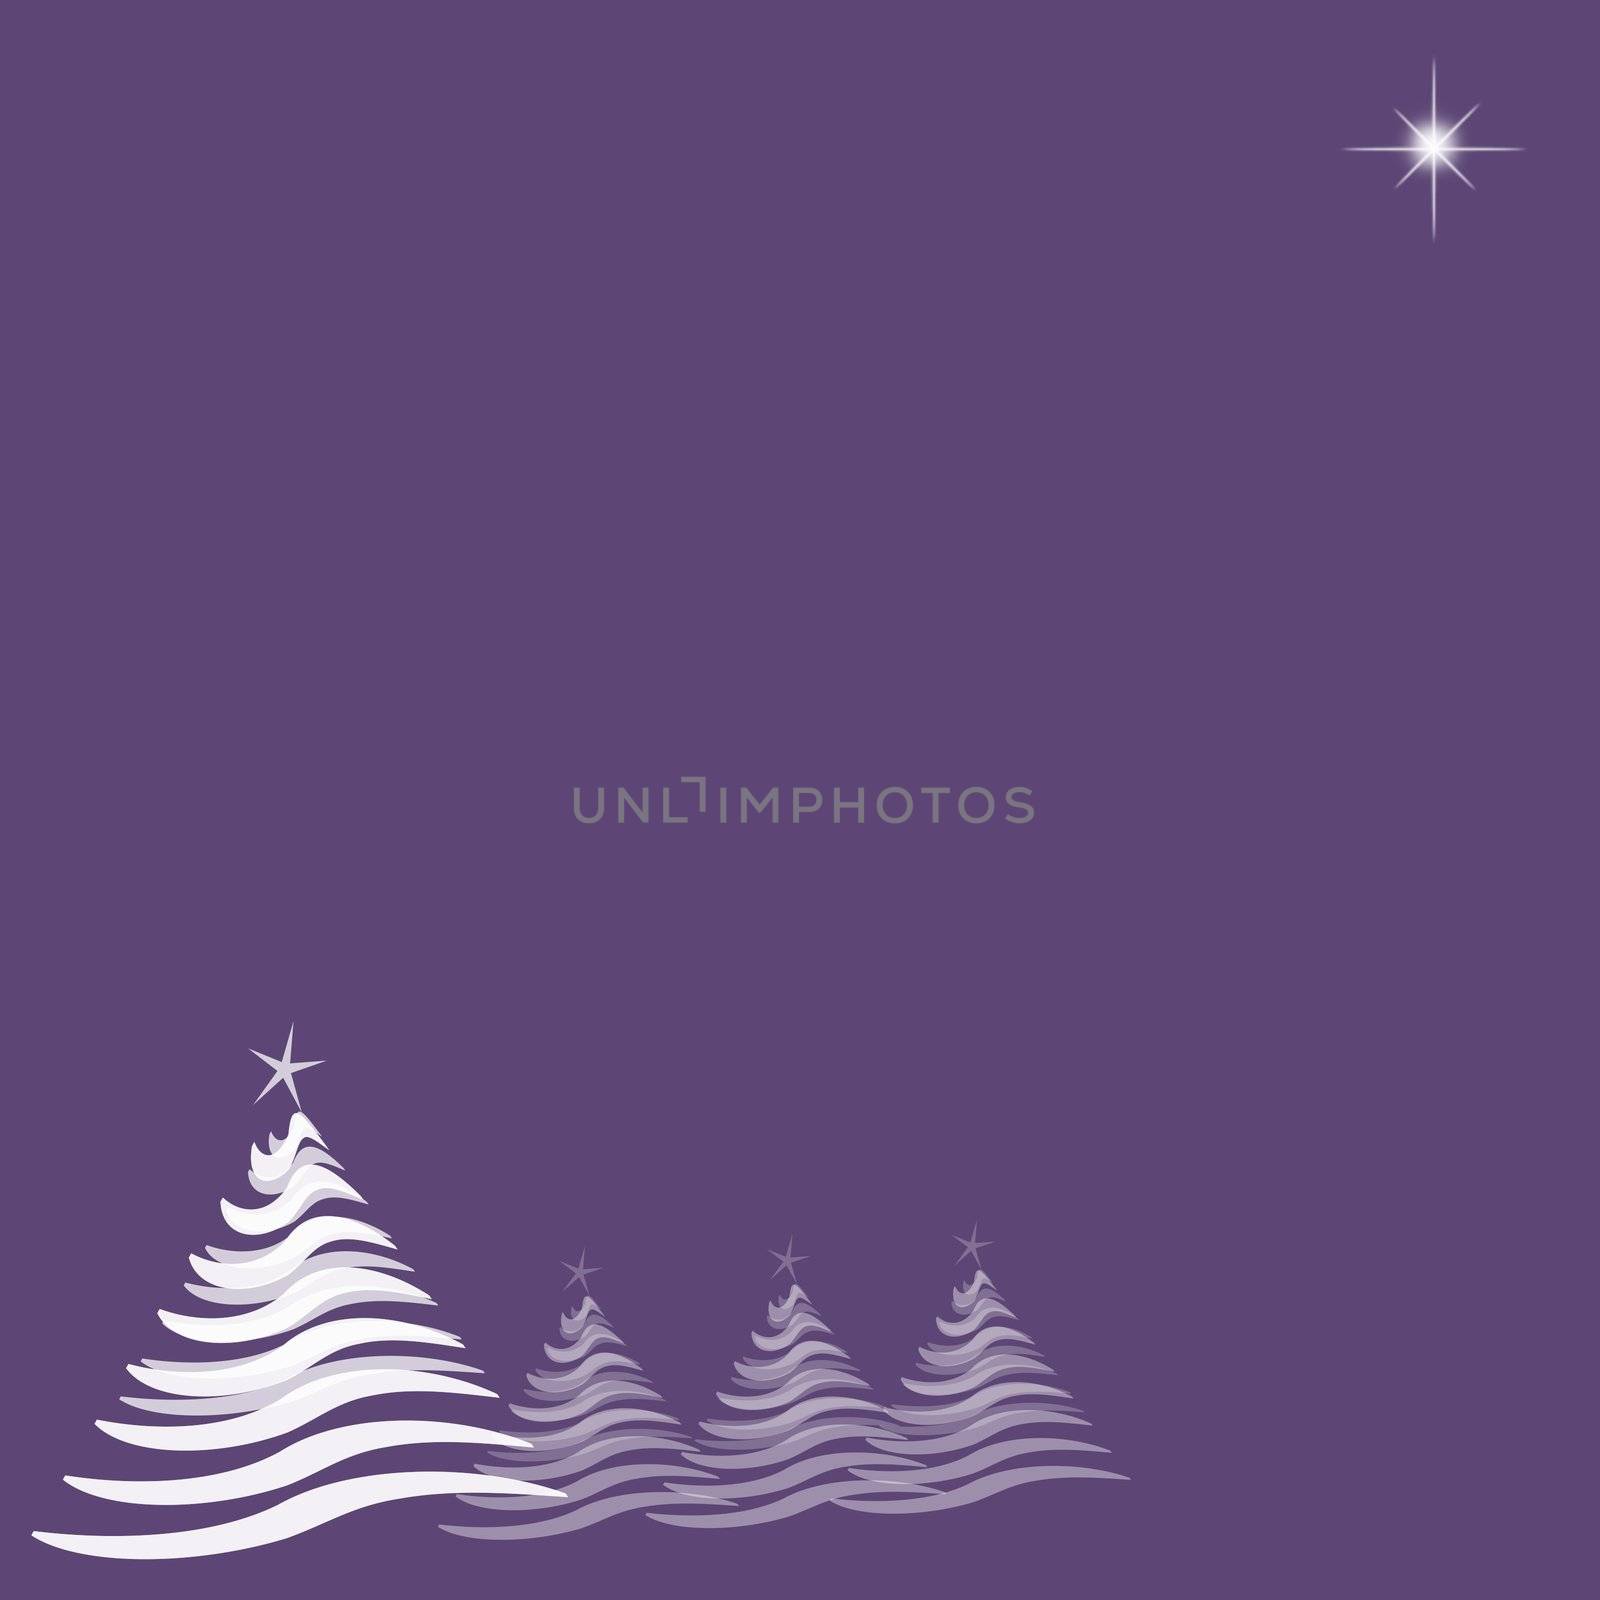 Abstract illustration with four white Christmas trees running from lower left, and one star at top right.  Purple background provides copy space.
